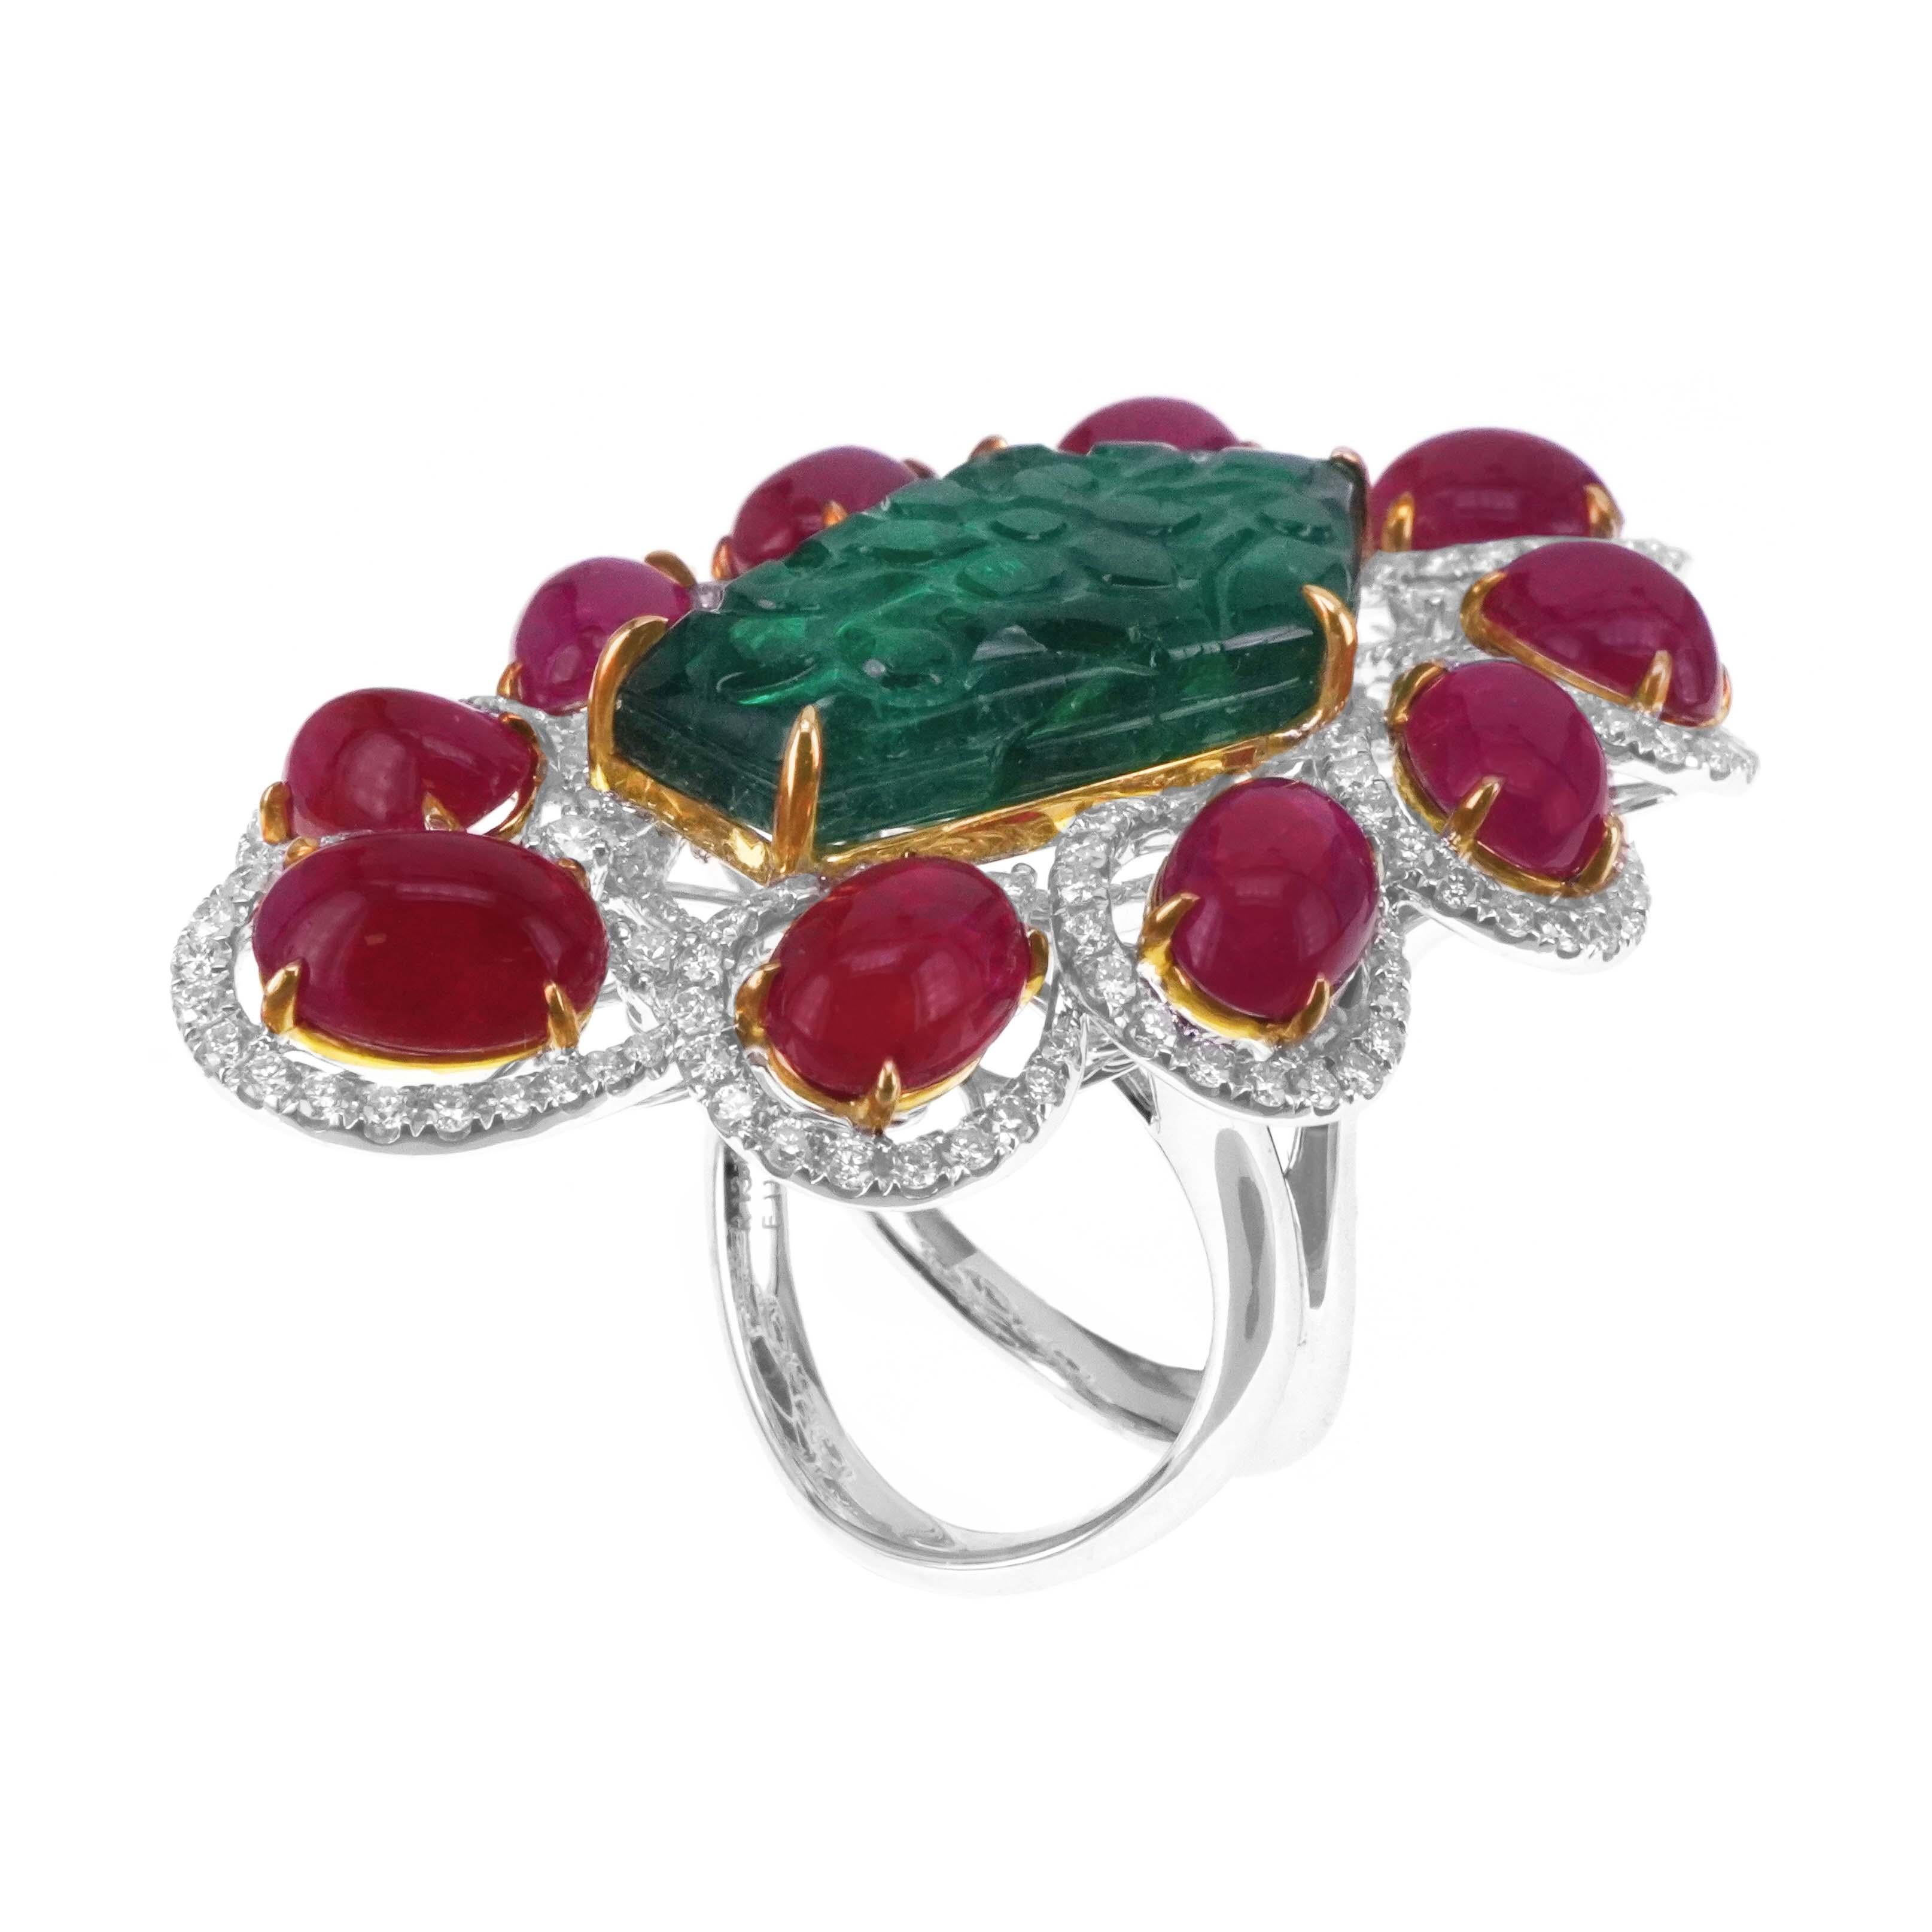 Anglo-Indian 11 Carat Mughal Cut Vivid Green Emerald & 16 Carat Vivid Red Ruby 18k Old Ring For Sale